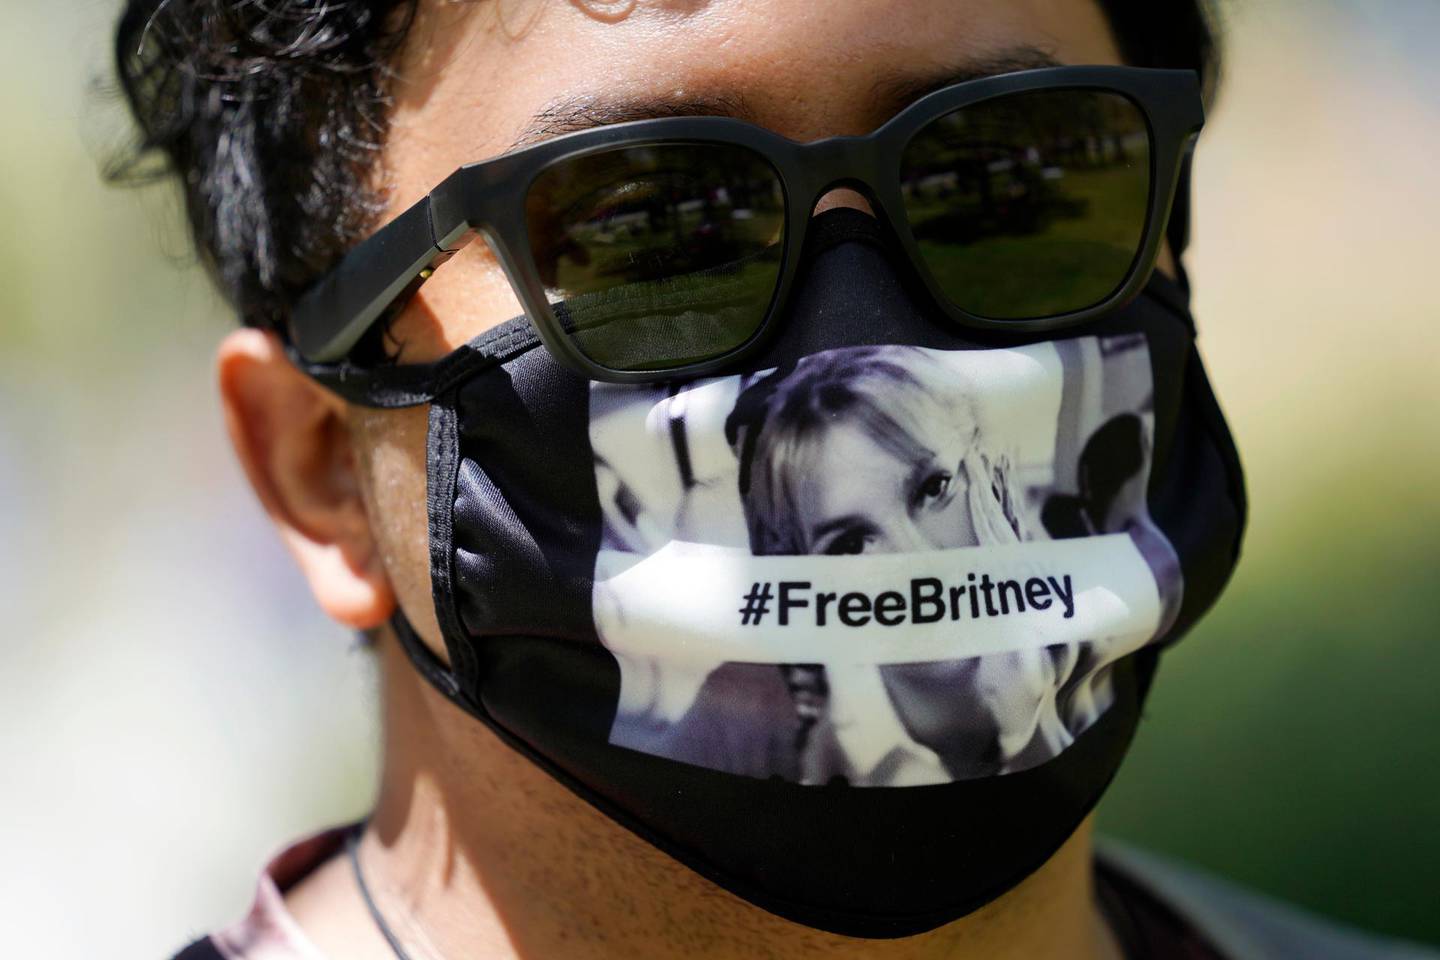 Britney Spears supporter Carlos Morales of Los Angeles wears a Free Britney mask outside a court hearing concerning the pop singer's conservatorship at the Stanley Mosk Courthouse, Wednesday, June 23, 2021, in Los Angeles. (AP Photo/Chris Pizzello)